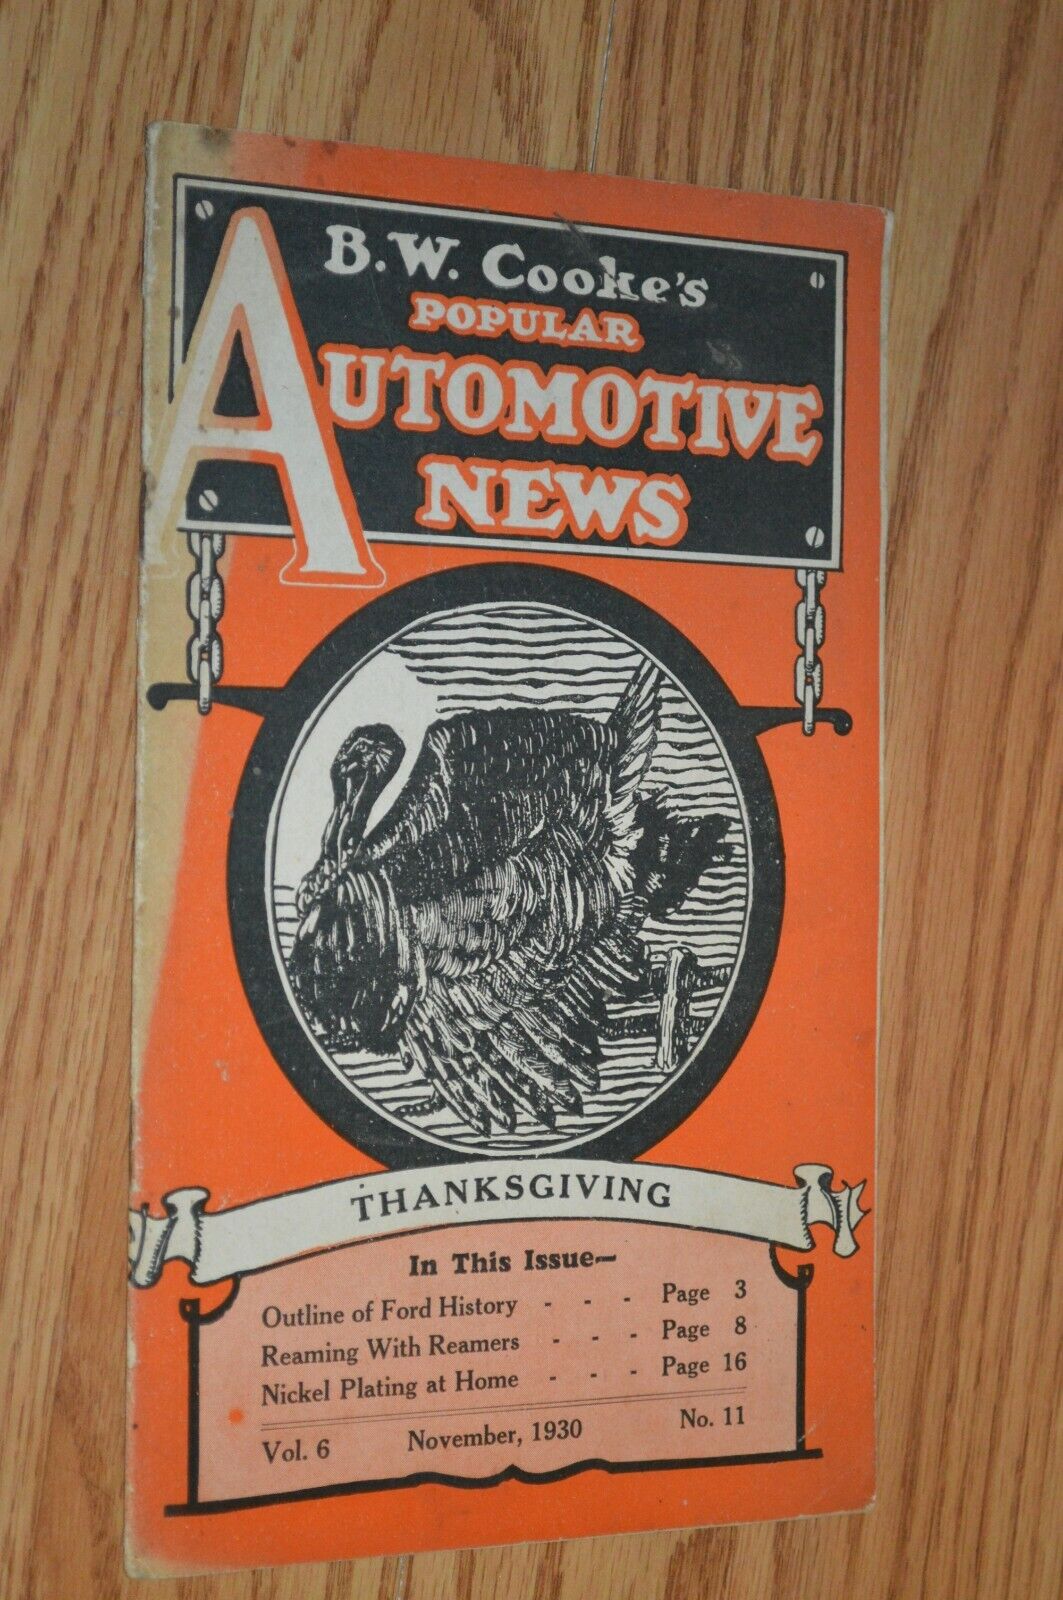 1930 JANUARY VOL 6 #11 B.W. COOKE\'S POPULAR AUTOMOTIVE NEWS BOOKLET-90 YEARS OLD